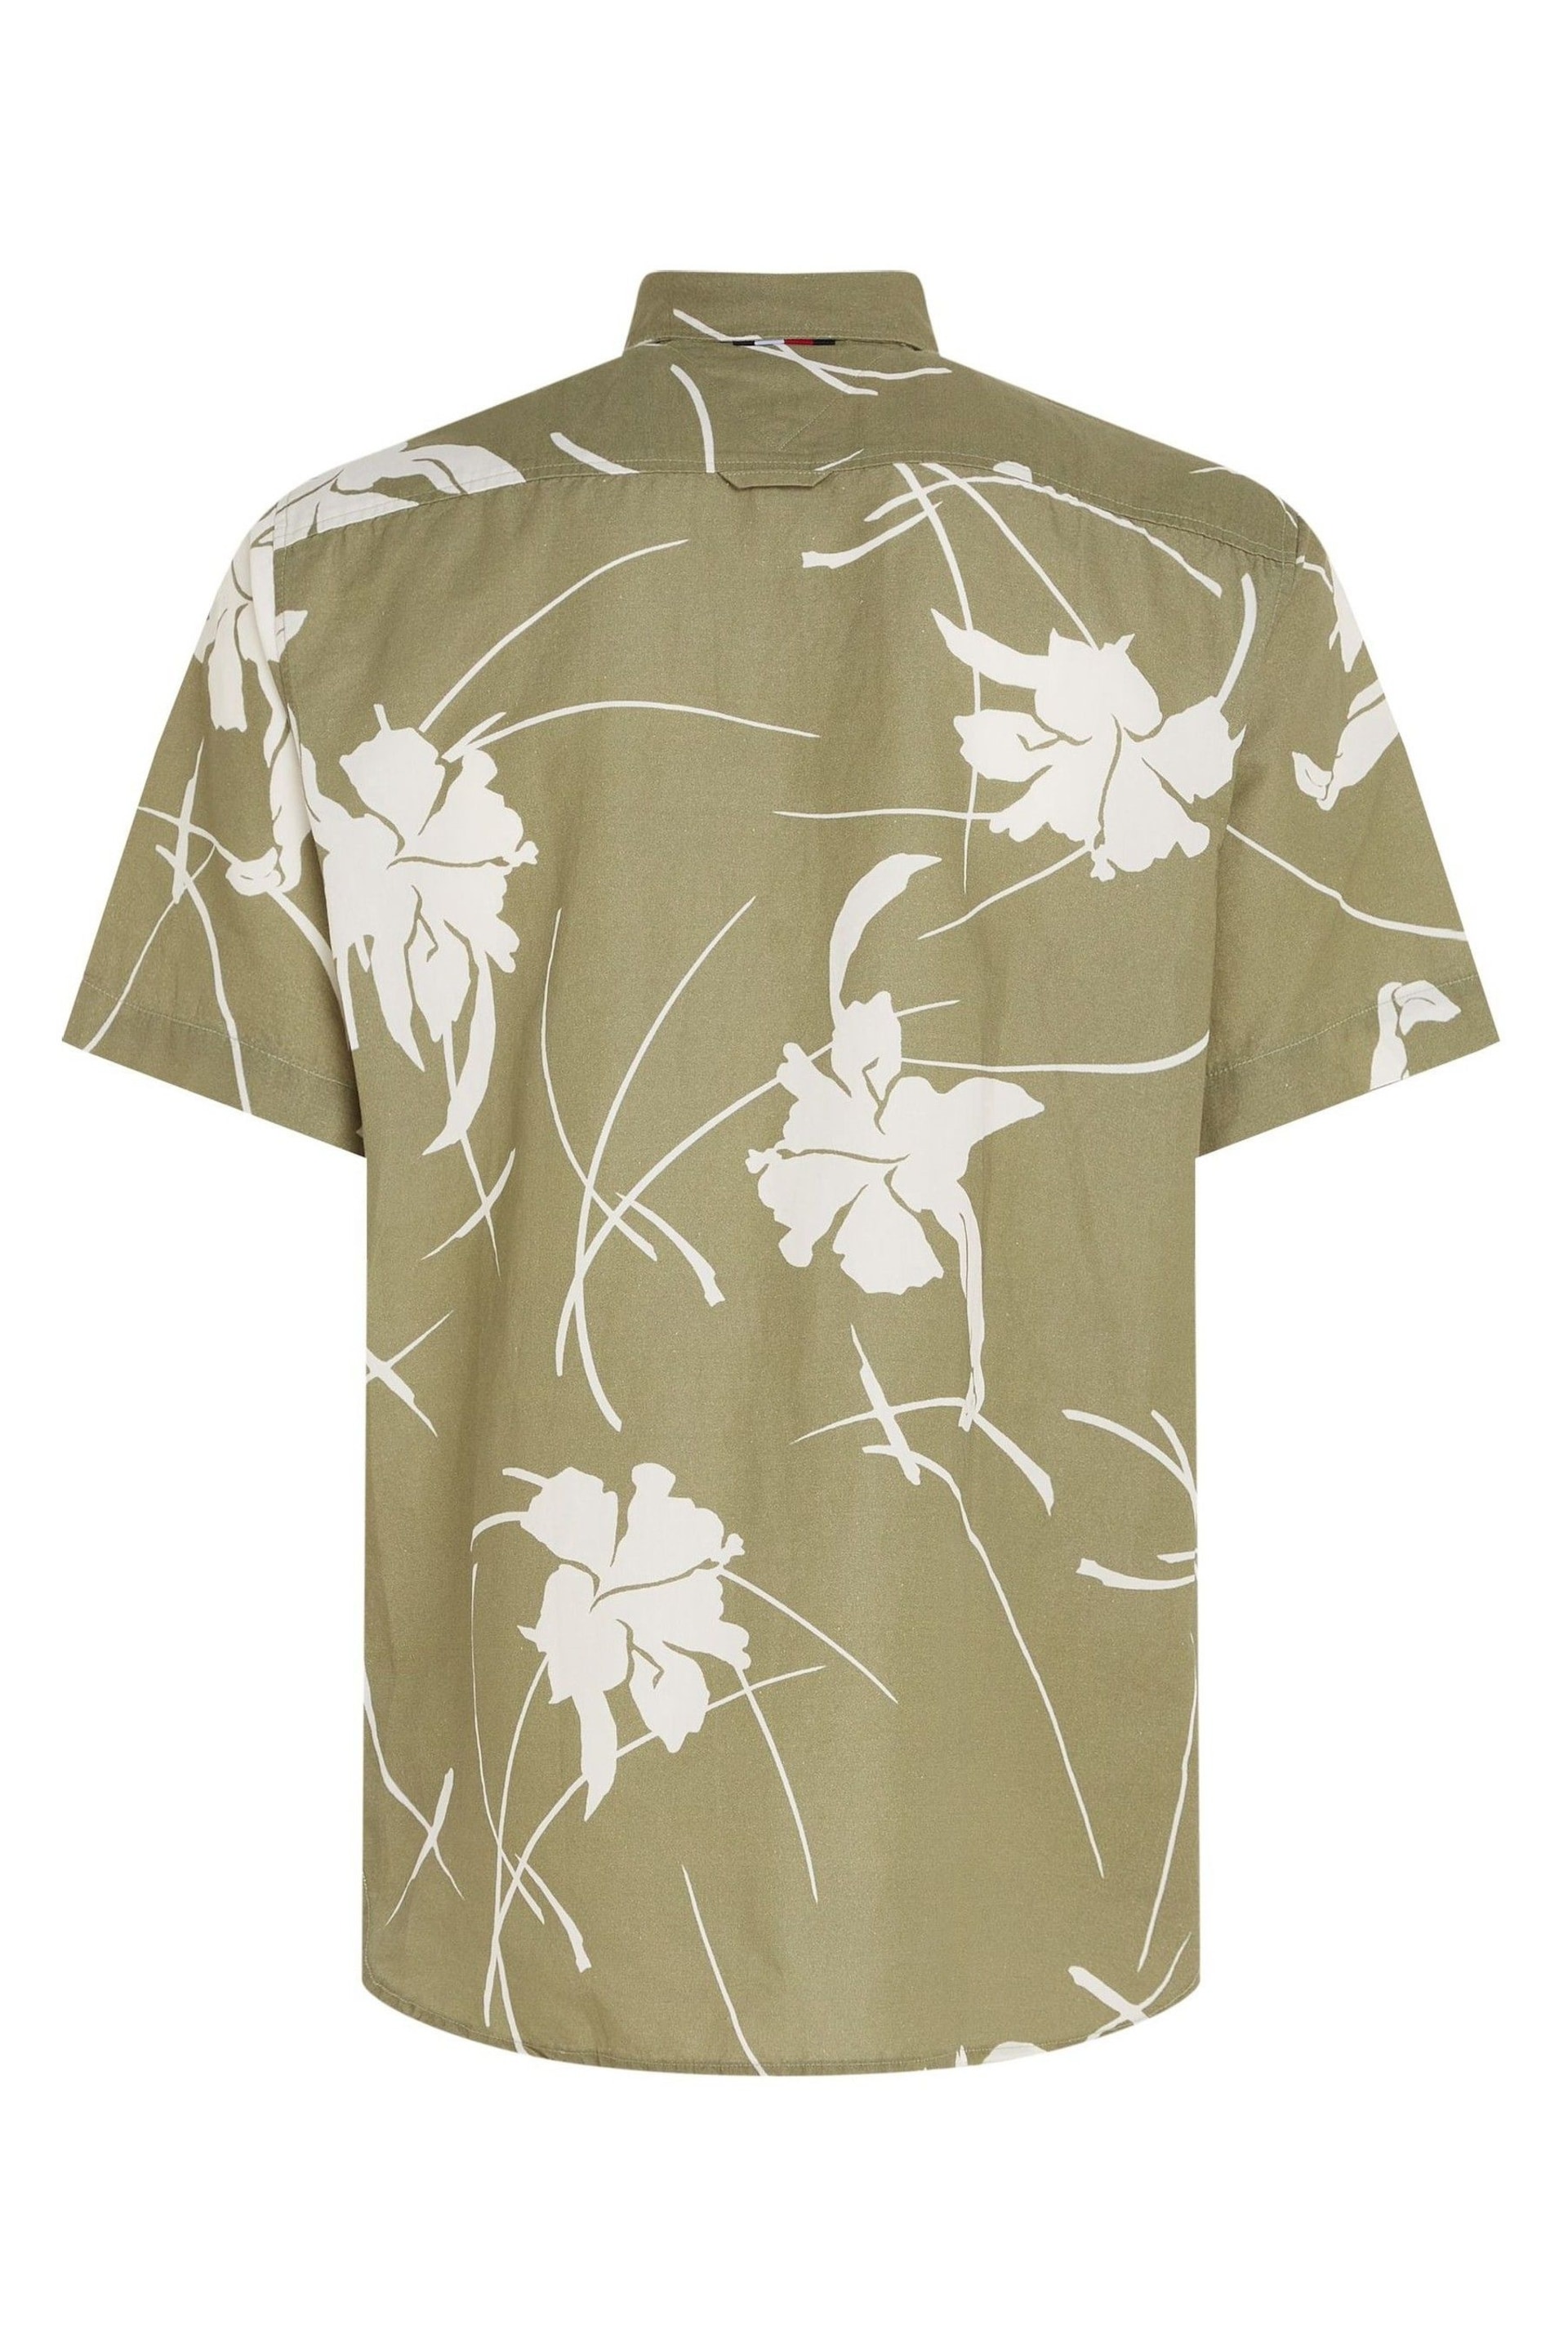 Tommy Hilfiger Large Tropical Print White Shirt - Image 5 of 6